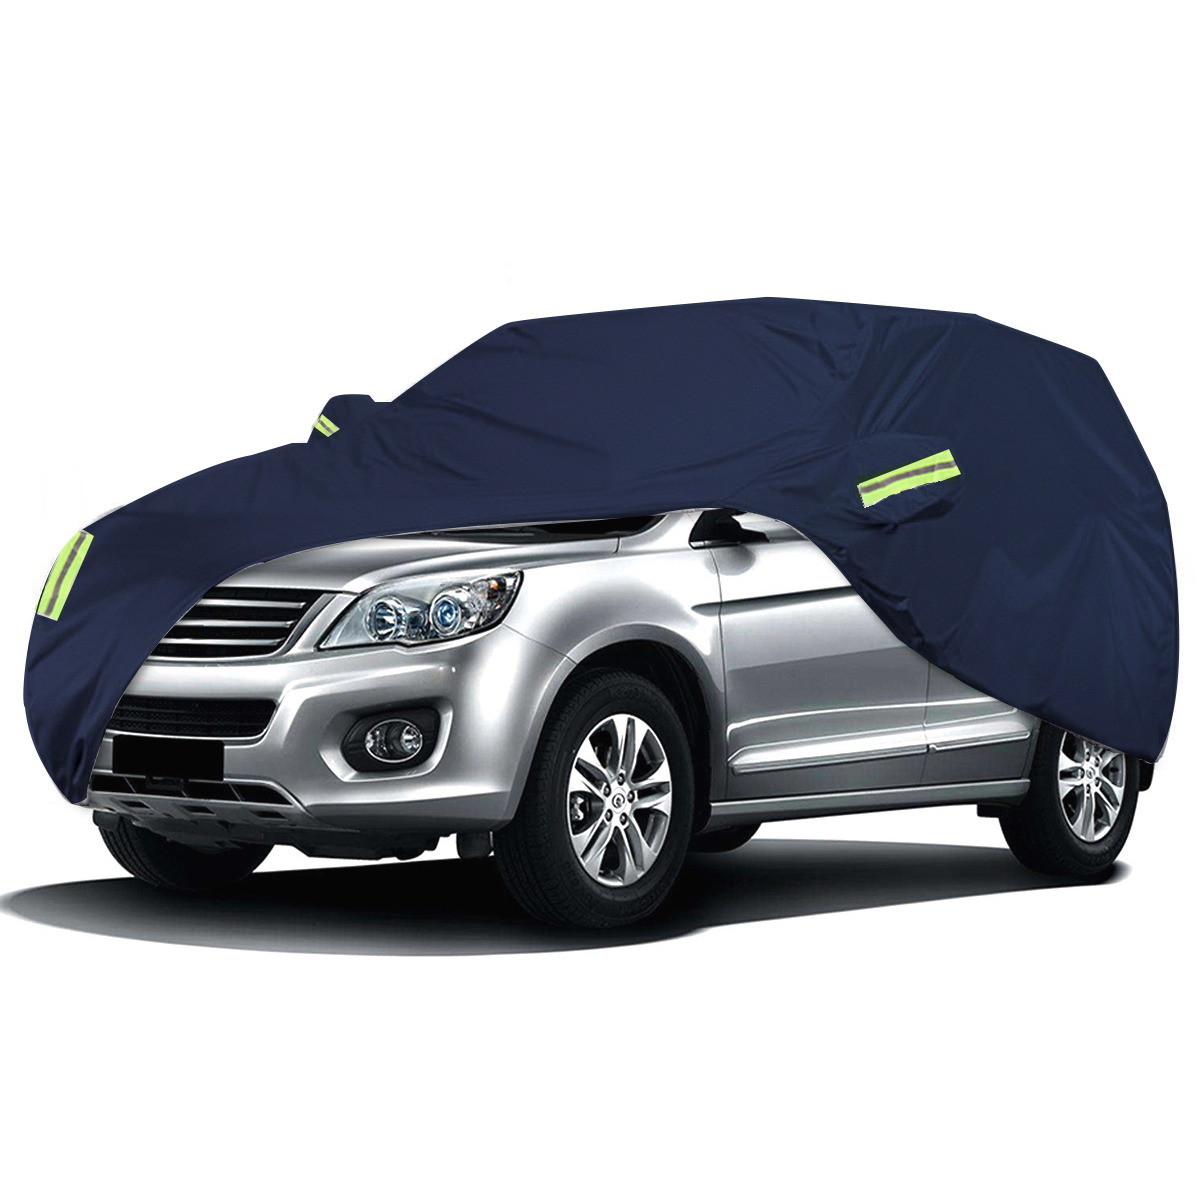 XL 5X2X1.85M 210T Single Layer Waterproof Full Car Cover Outdoor Dustproof Sunscreen Rain and Snow for SUV - Auto GoShop